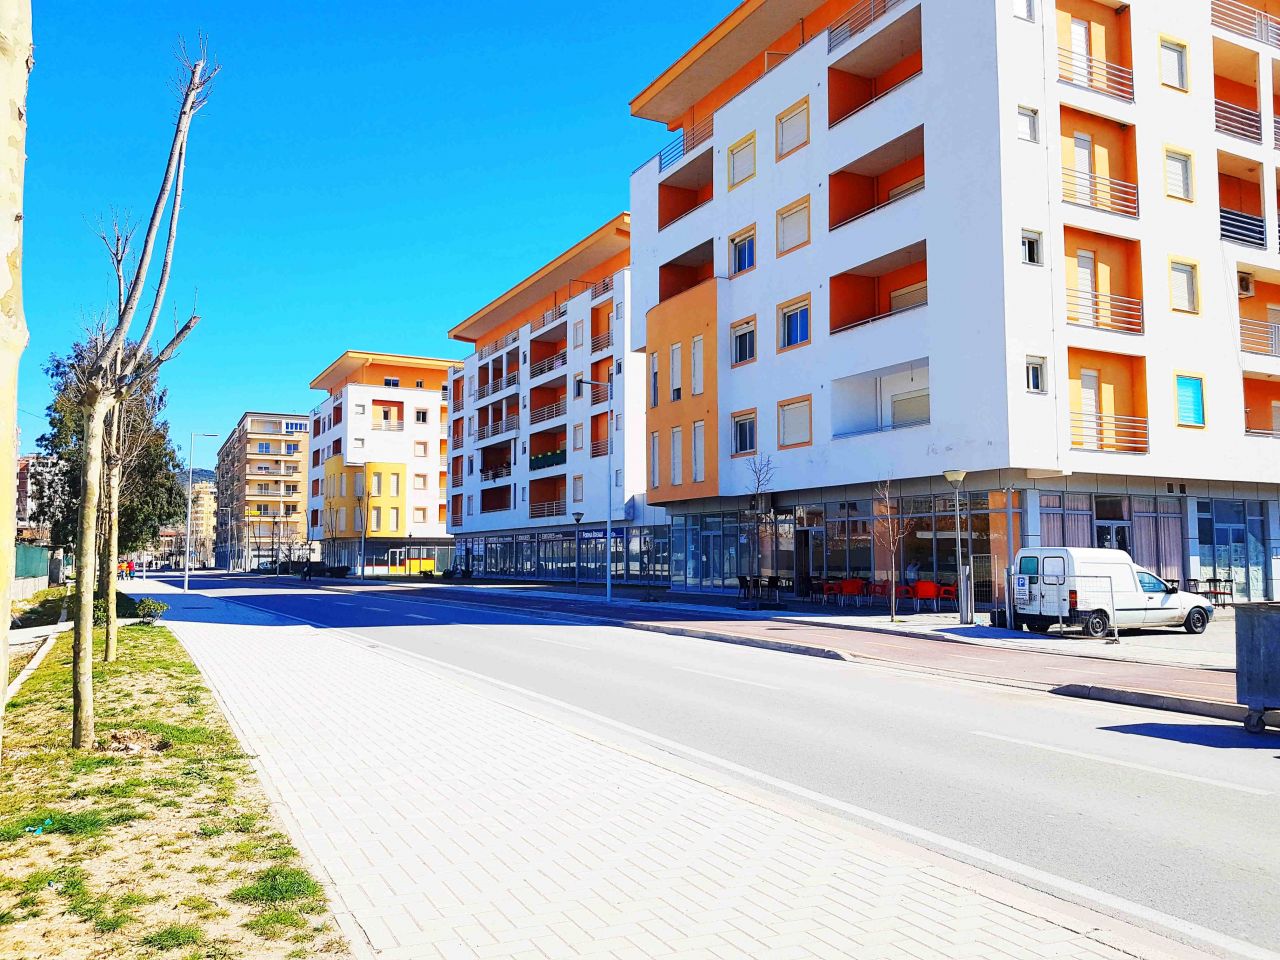 Holiday apartment for rent in Vlora Albania Estate Apartment For Rent